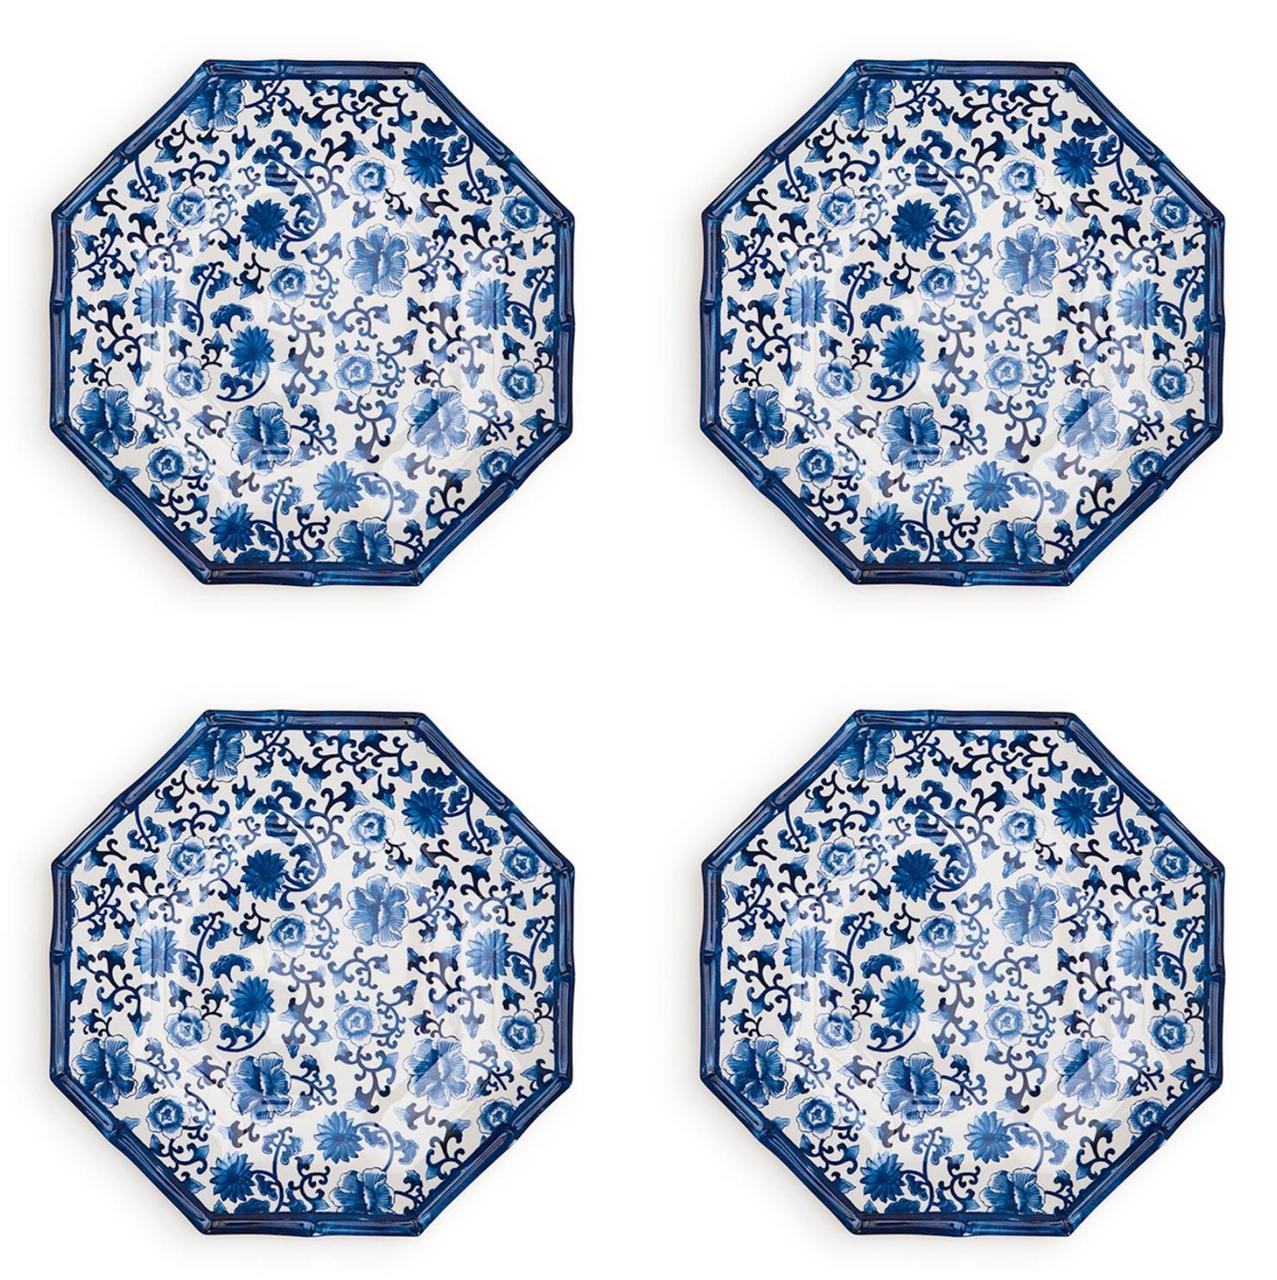 Erwin-Imbs Blue Chinoiserie Dinner Plates | Set of 4